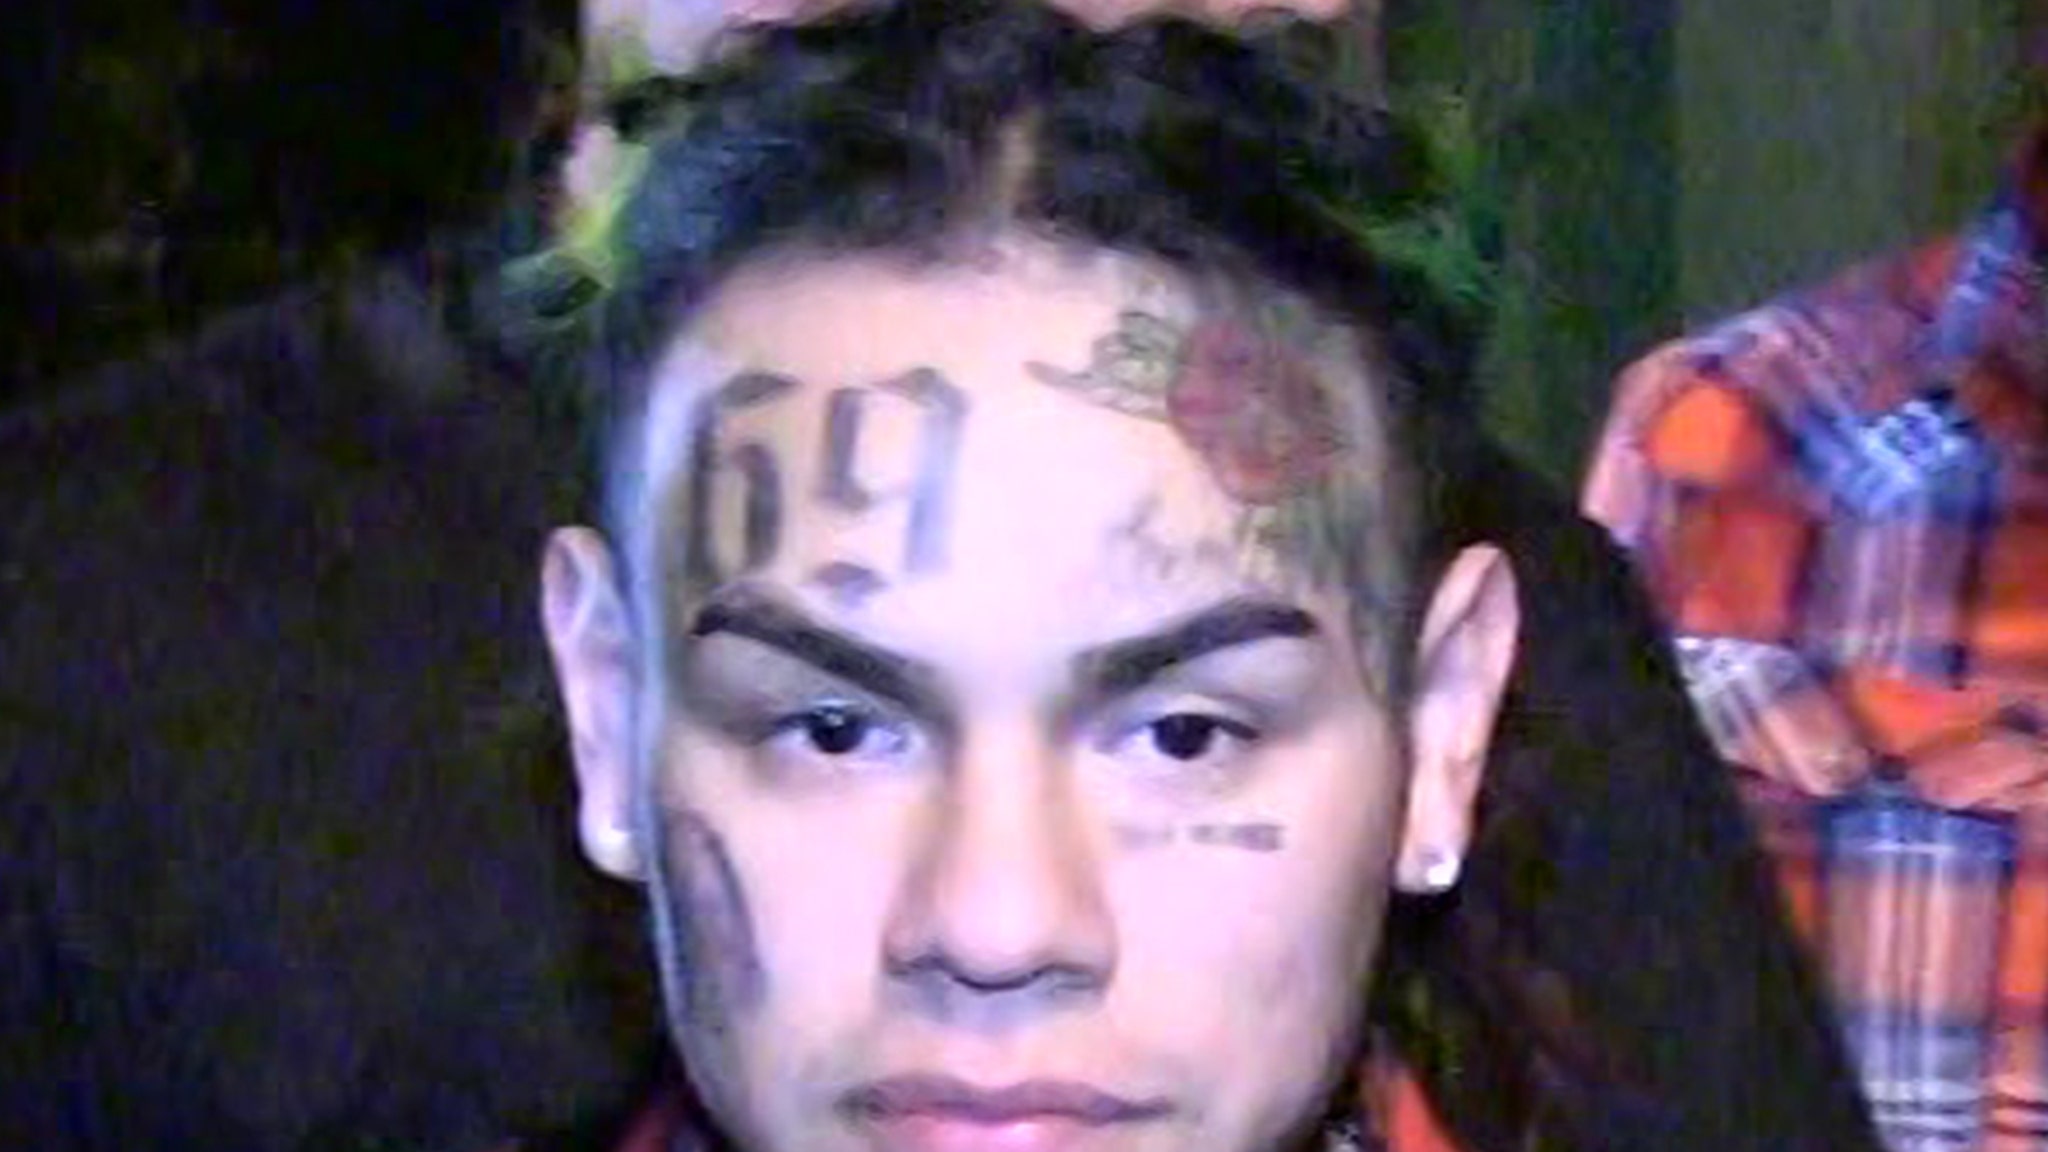 Tekashi 6ix9ine Locked Away in Room for Safety by Gym Staff After Beatdown